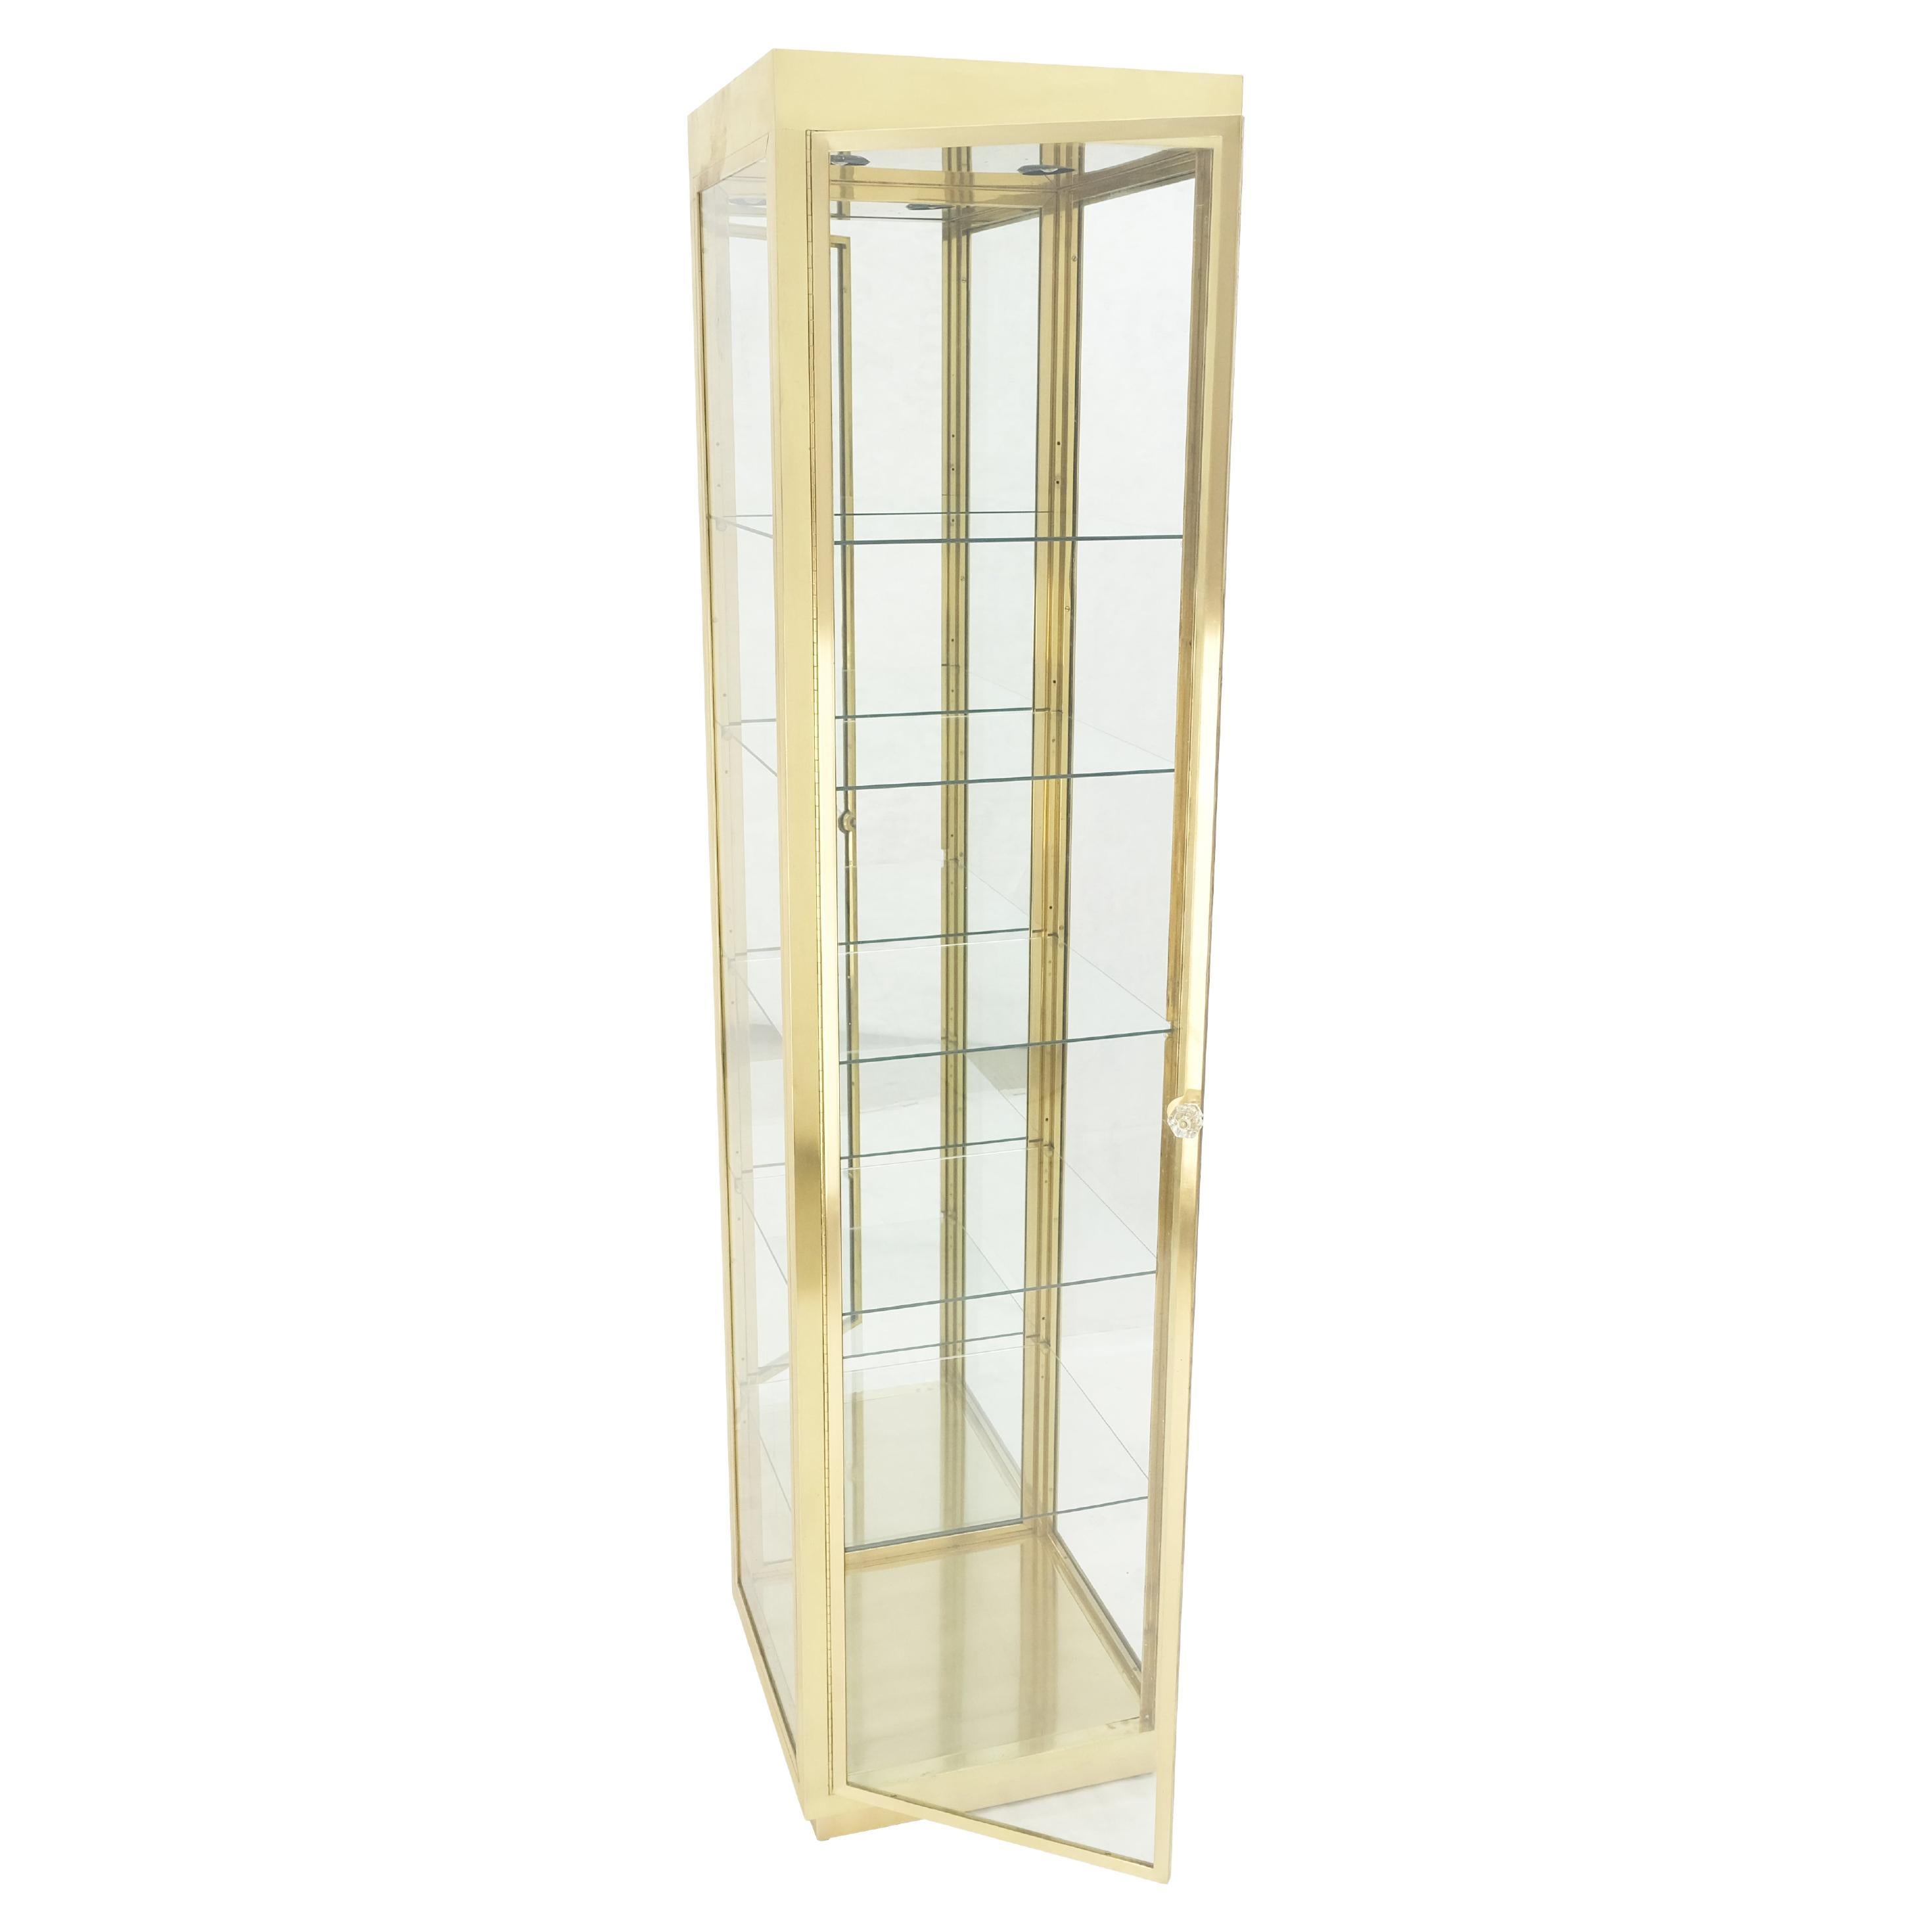 20" Sqaure Solid Brass Case 7' Tall Glass Shelve Display Cabinet Vitrine MINT!